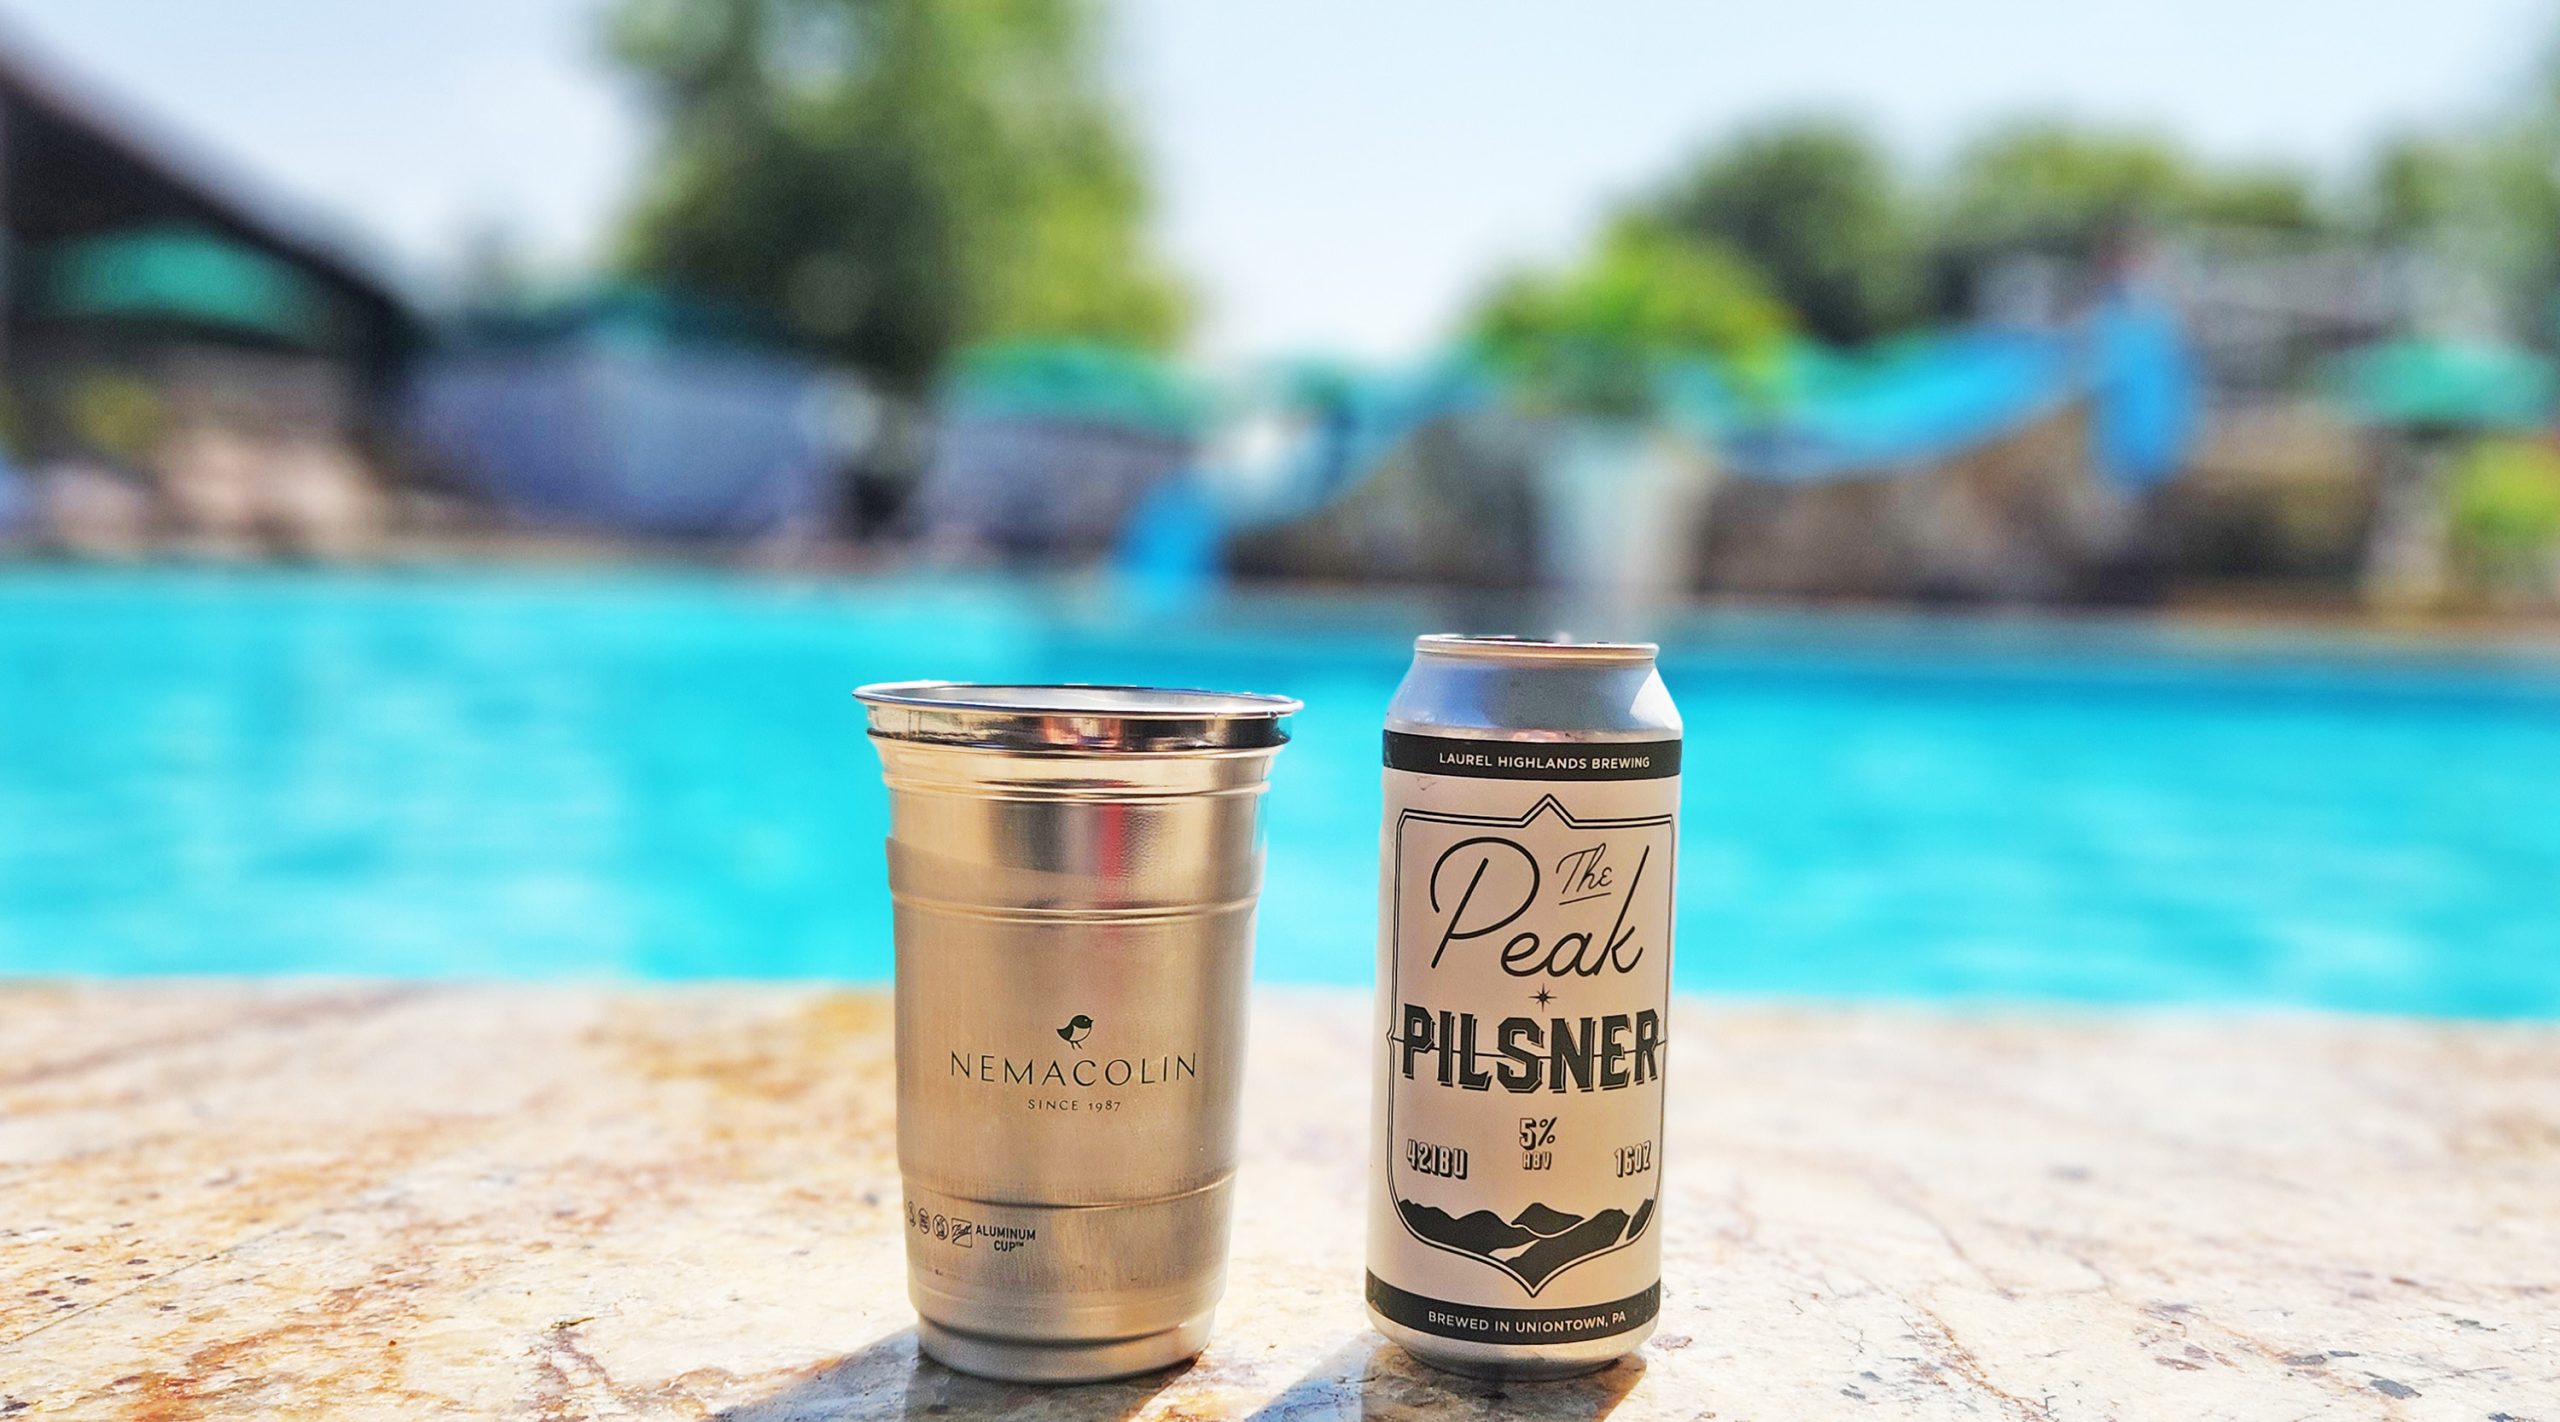 A beer cup and beer can on a pool deck